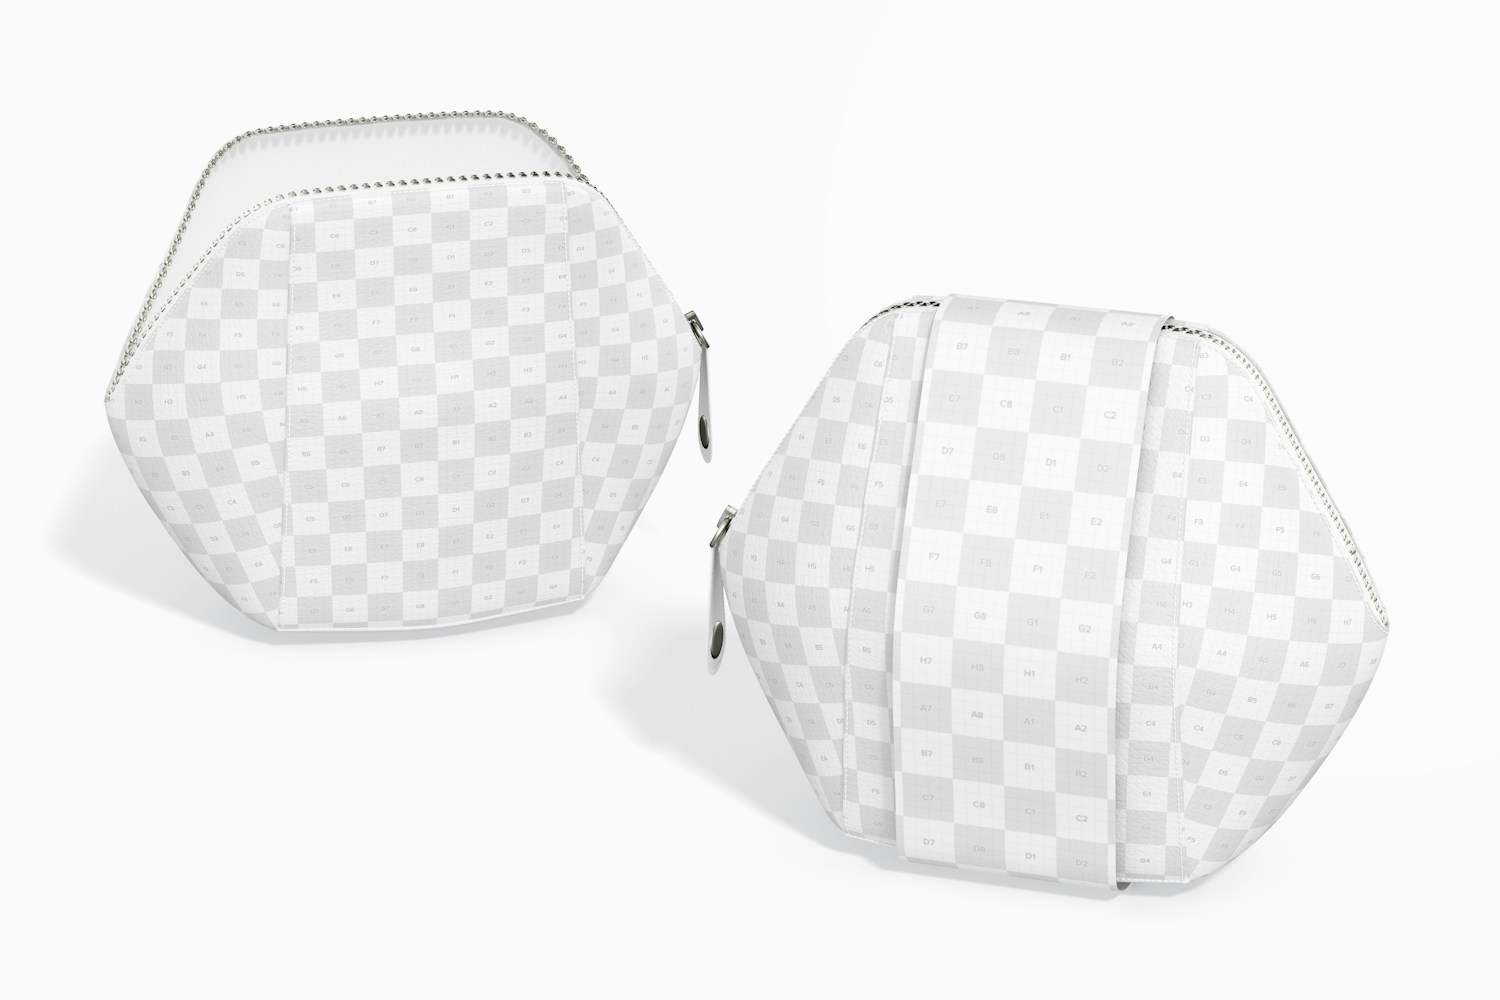 Hexagonal Cosmetic Bags Mockup, Opened and Closed